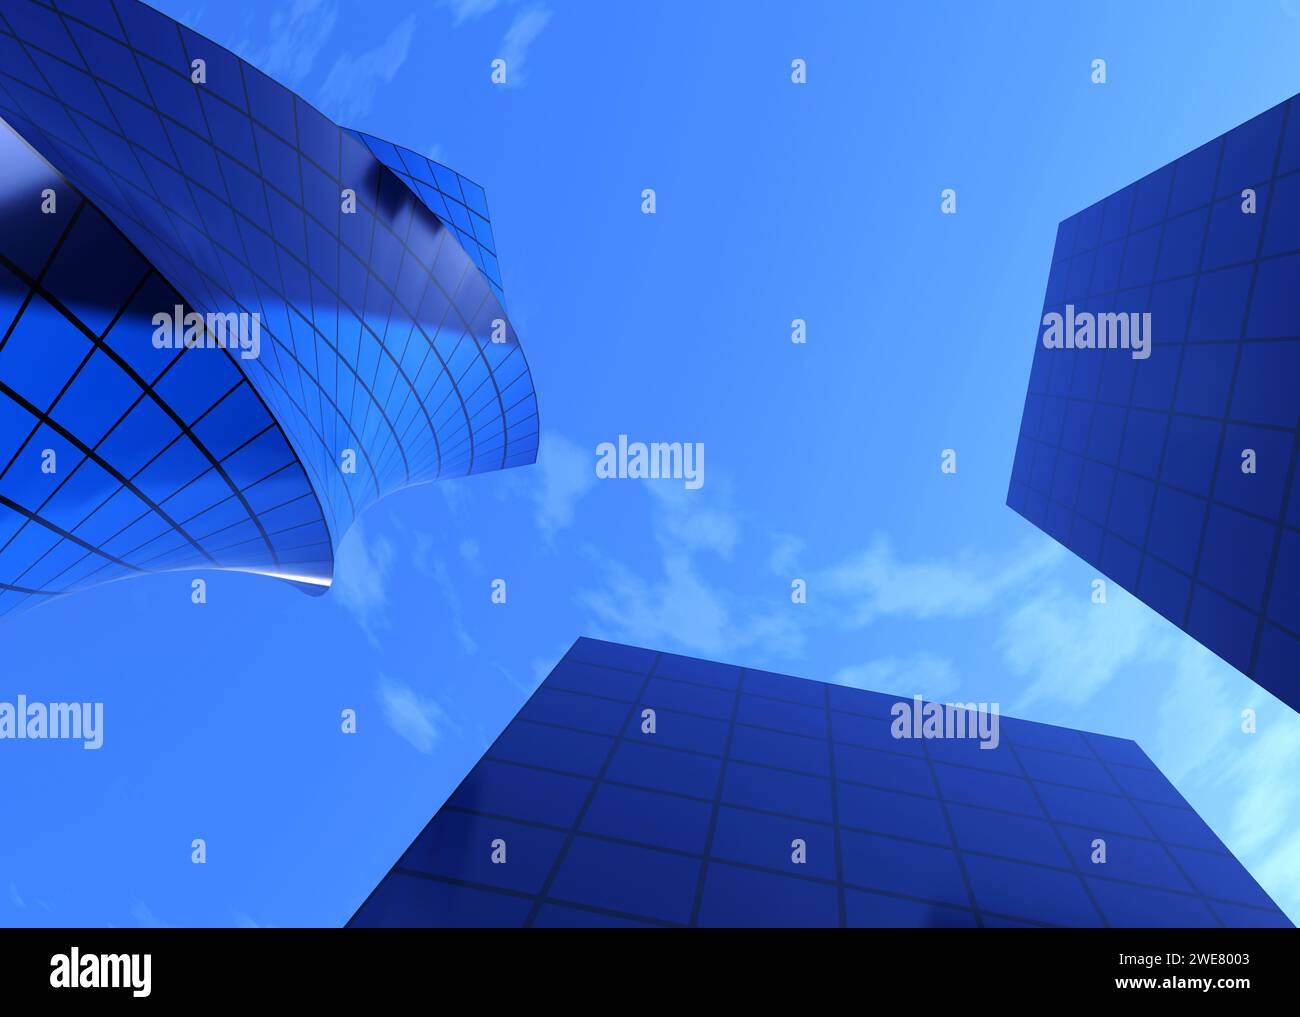 Blue glass skyscrapers over blue sky, 3D Illustration. Stock Photo